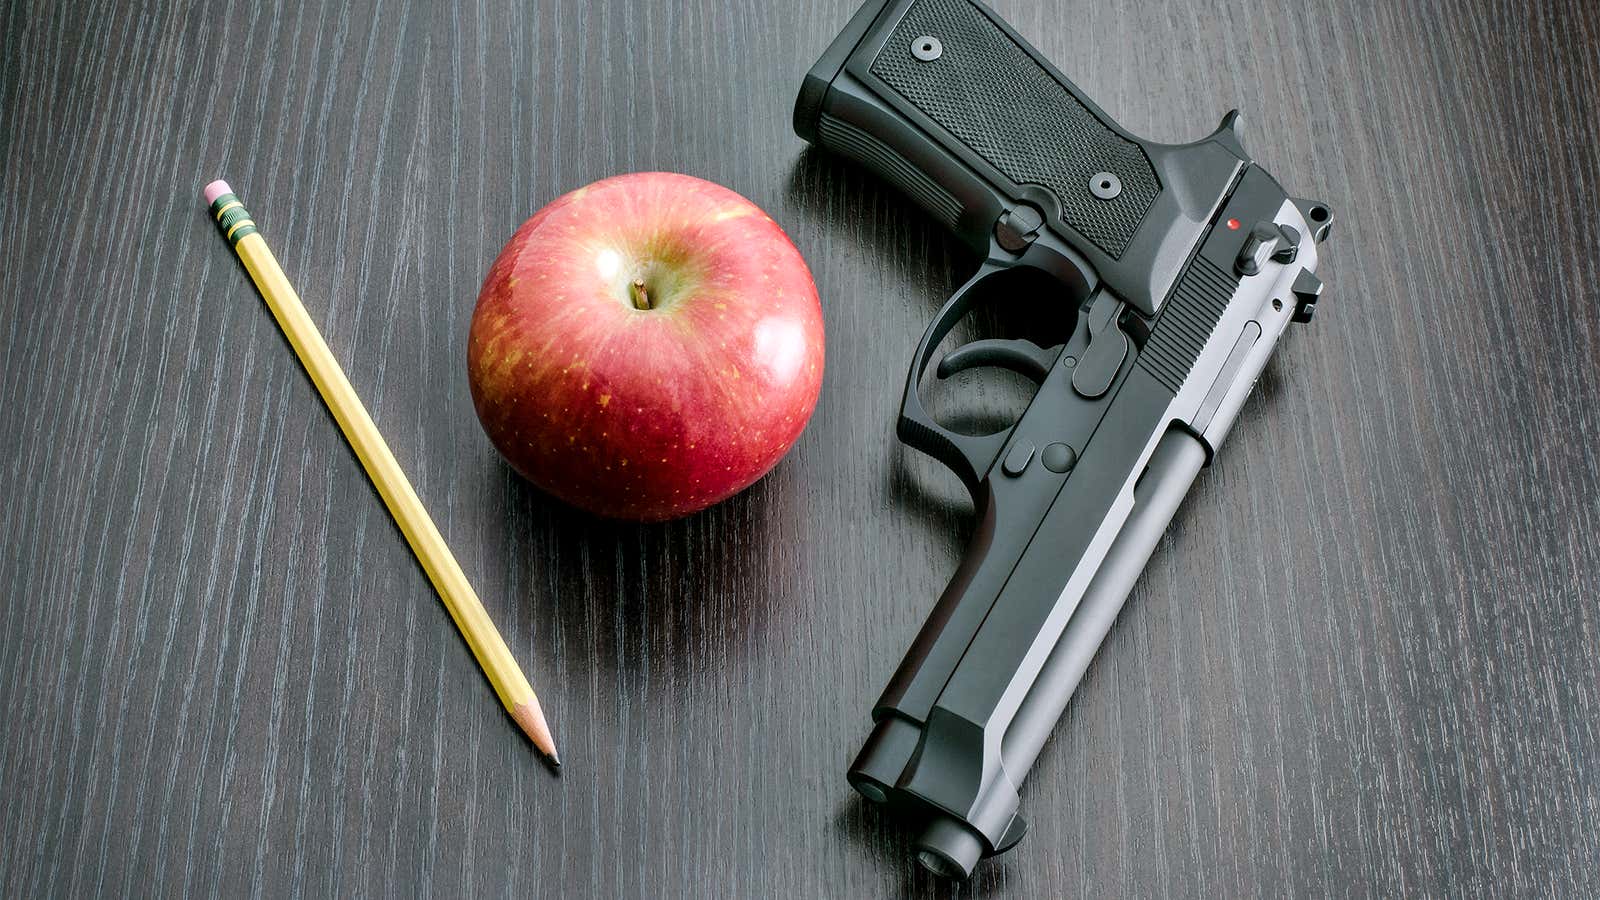 Image for Teachers Explain Why They Need To Carry Guns In The Classroom